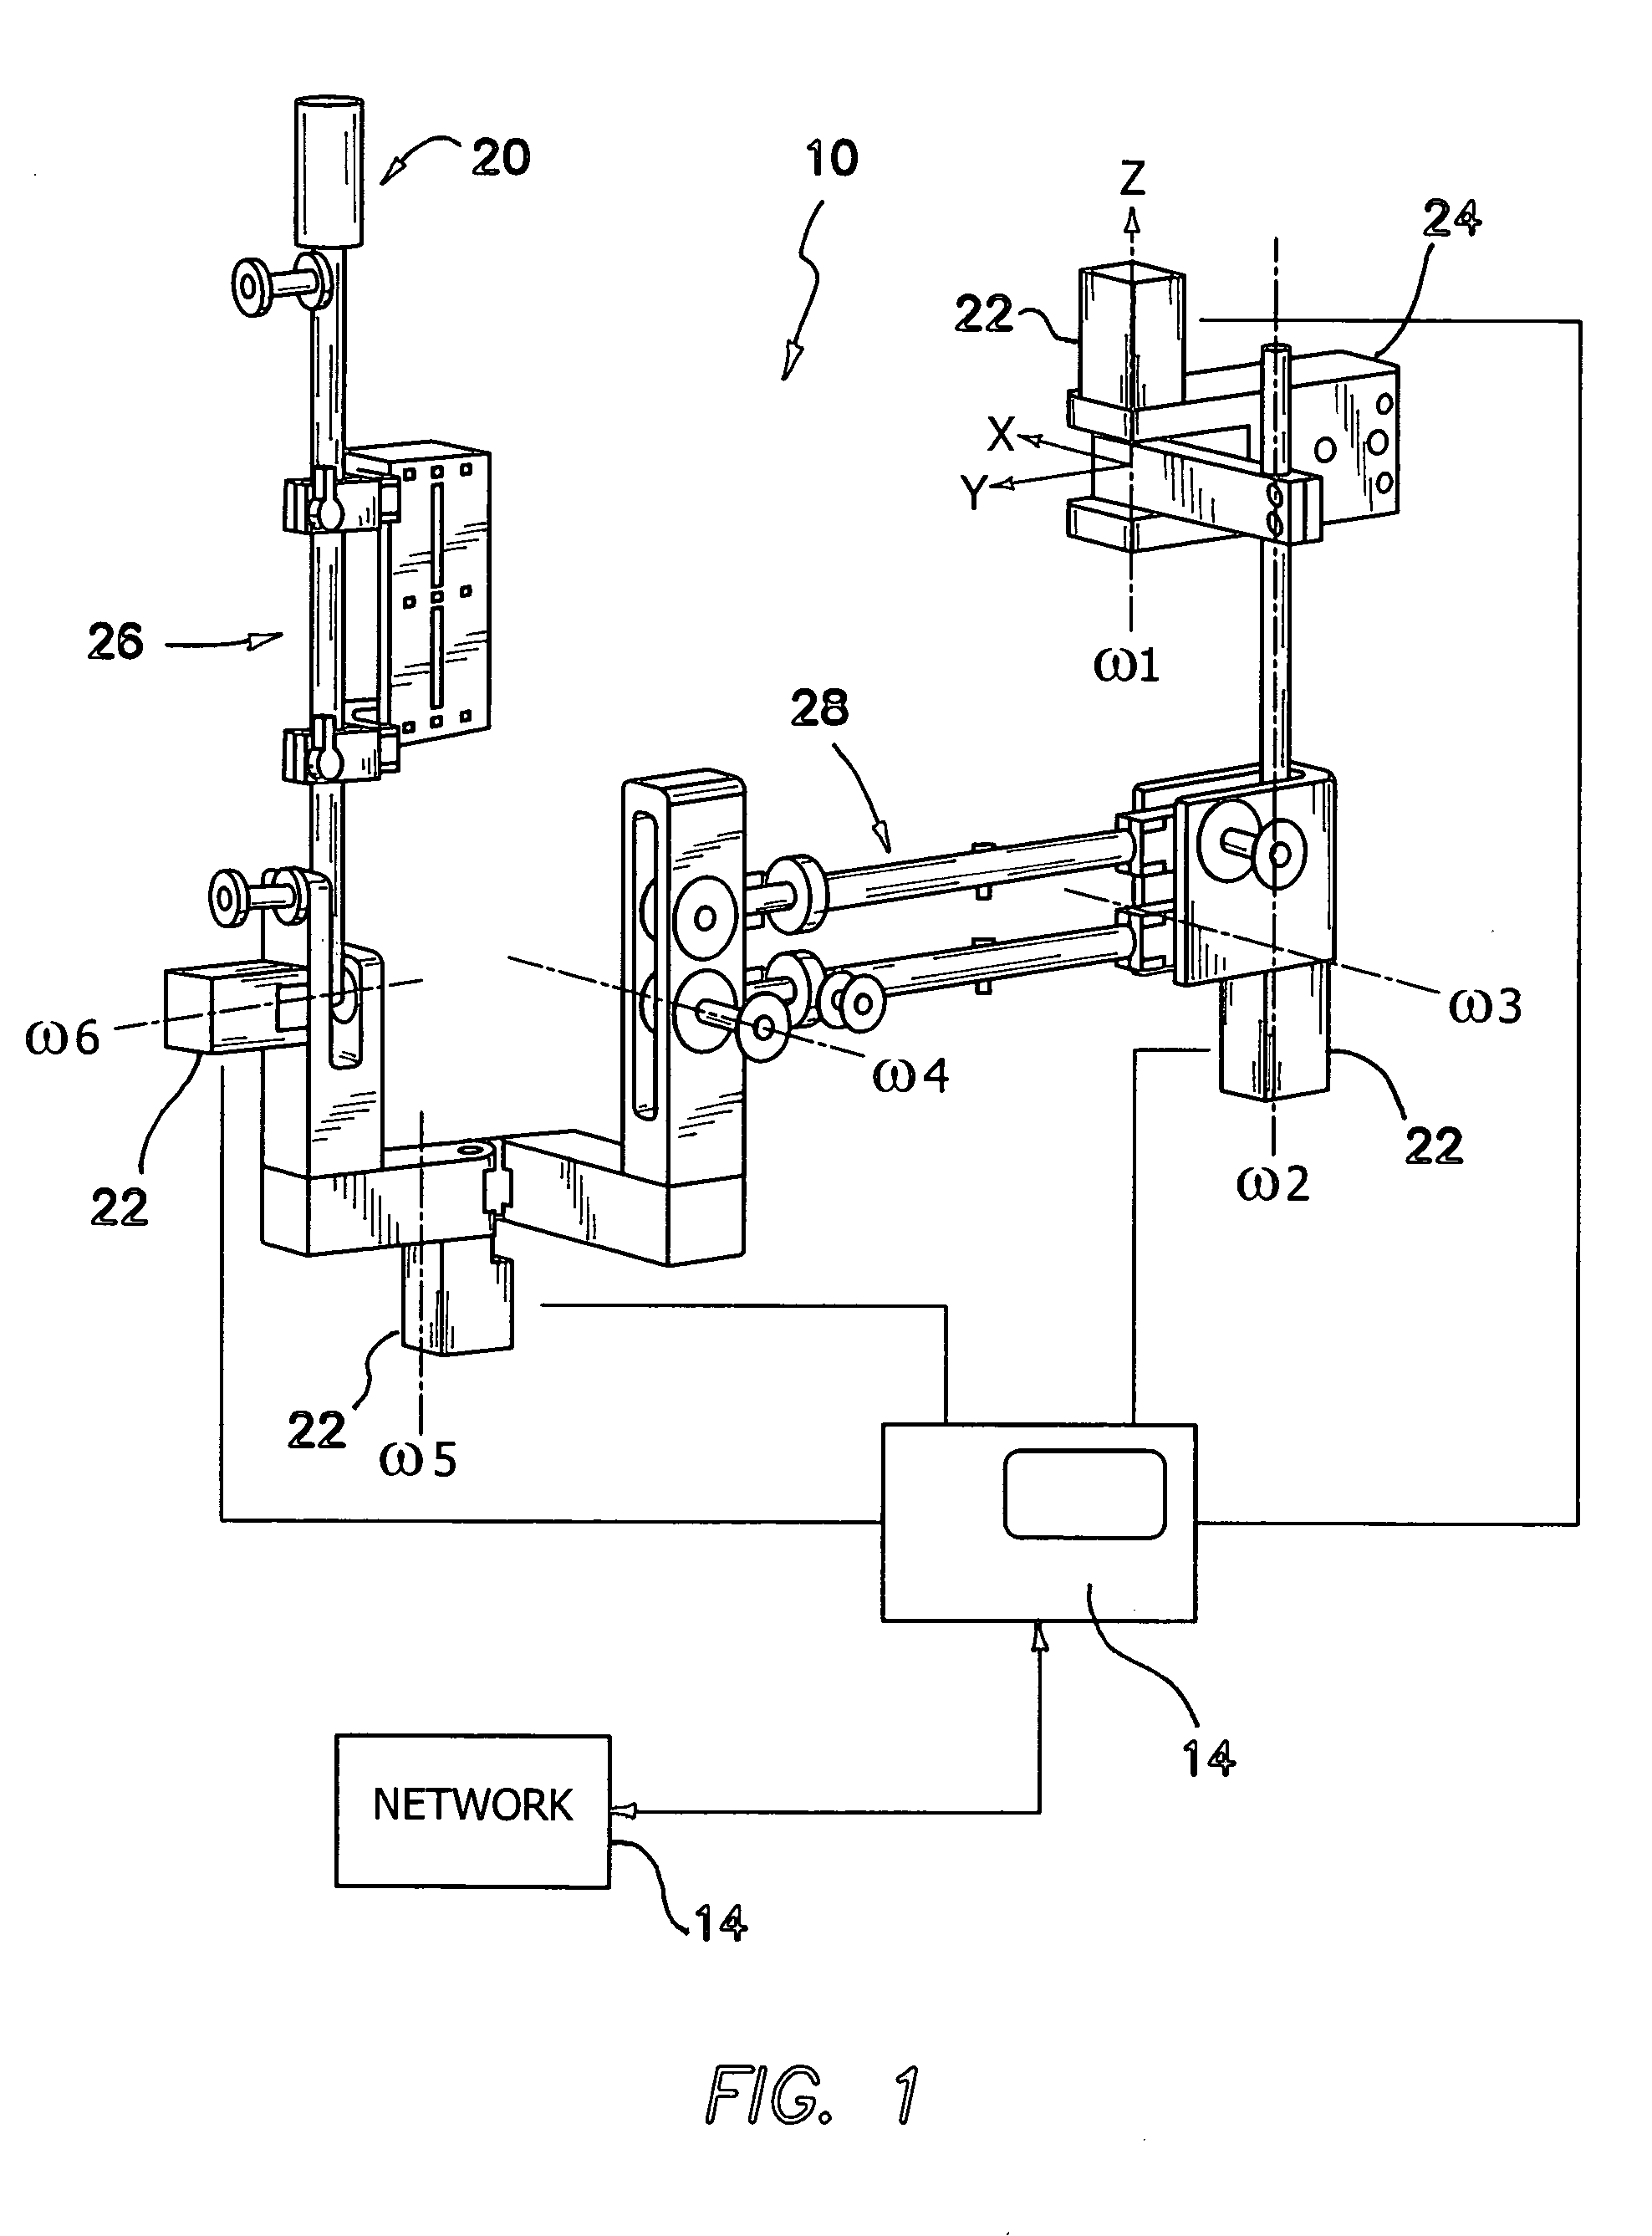 Method and apparatus for automating arm and grasping movement training for rehabilitation of patients with motor impairment